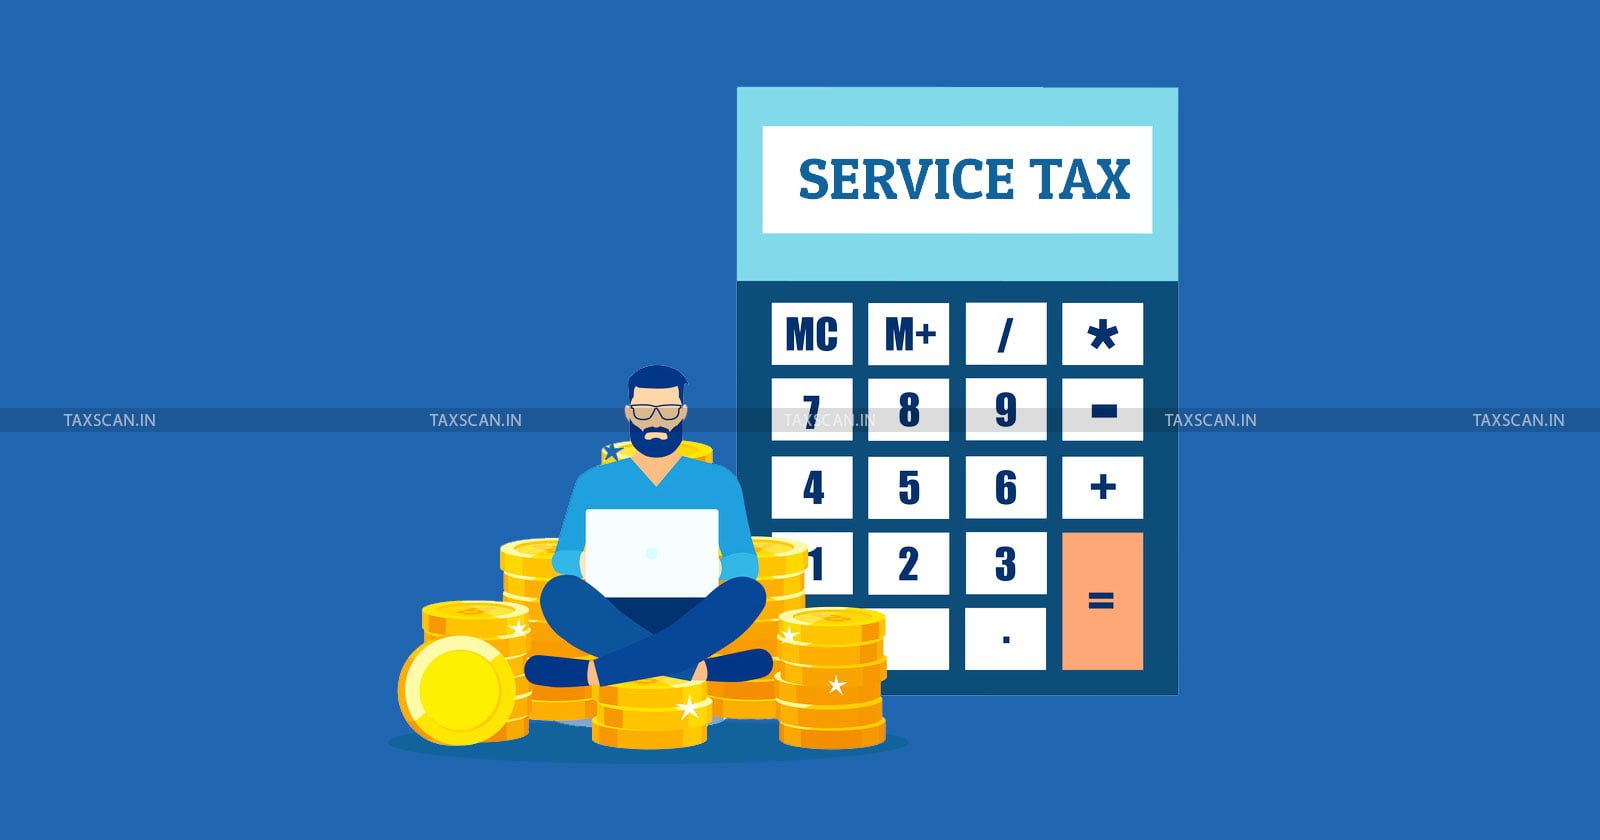 Payment of Service Tax - Service Tax - CESTAT - Liability of Payment - Liability - TAXSCAN